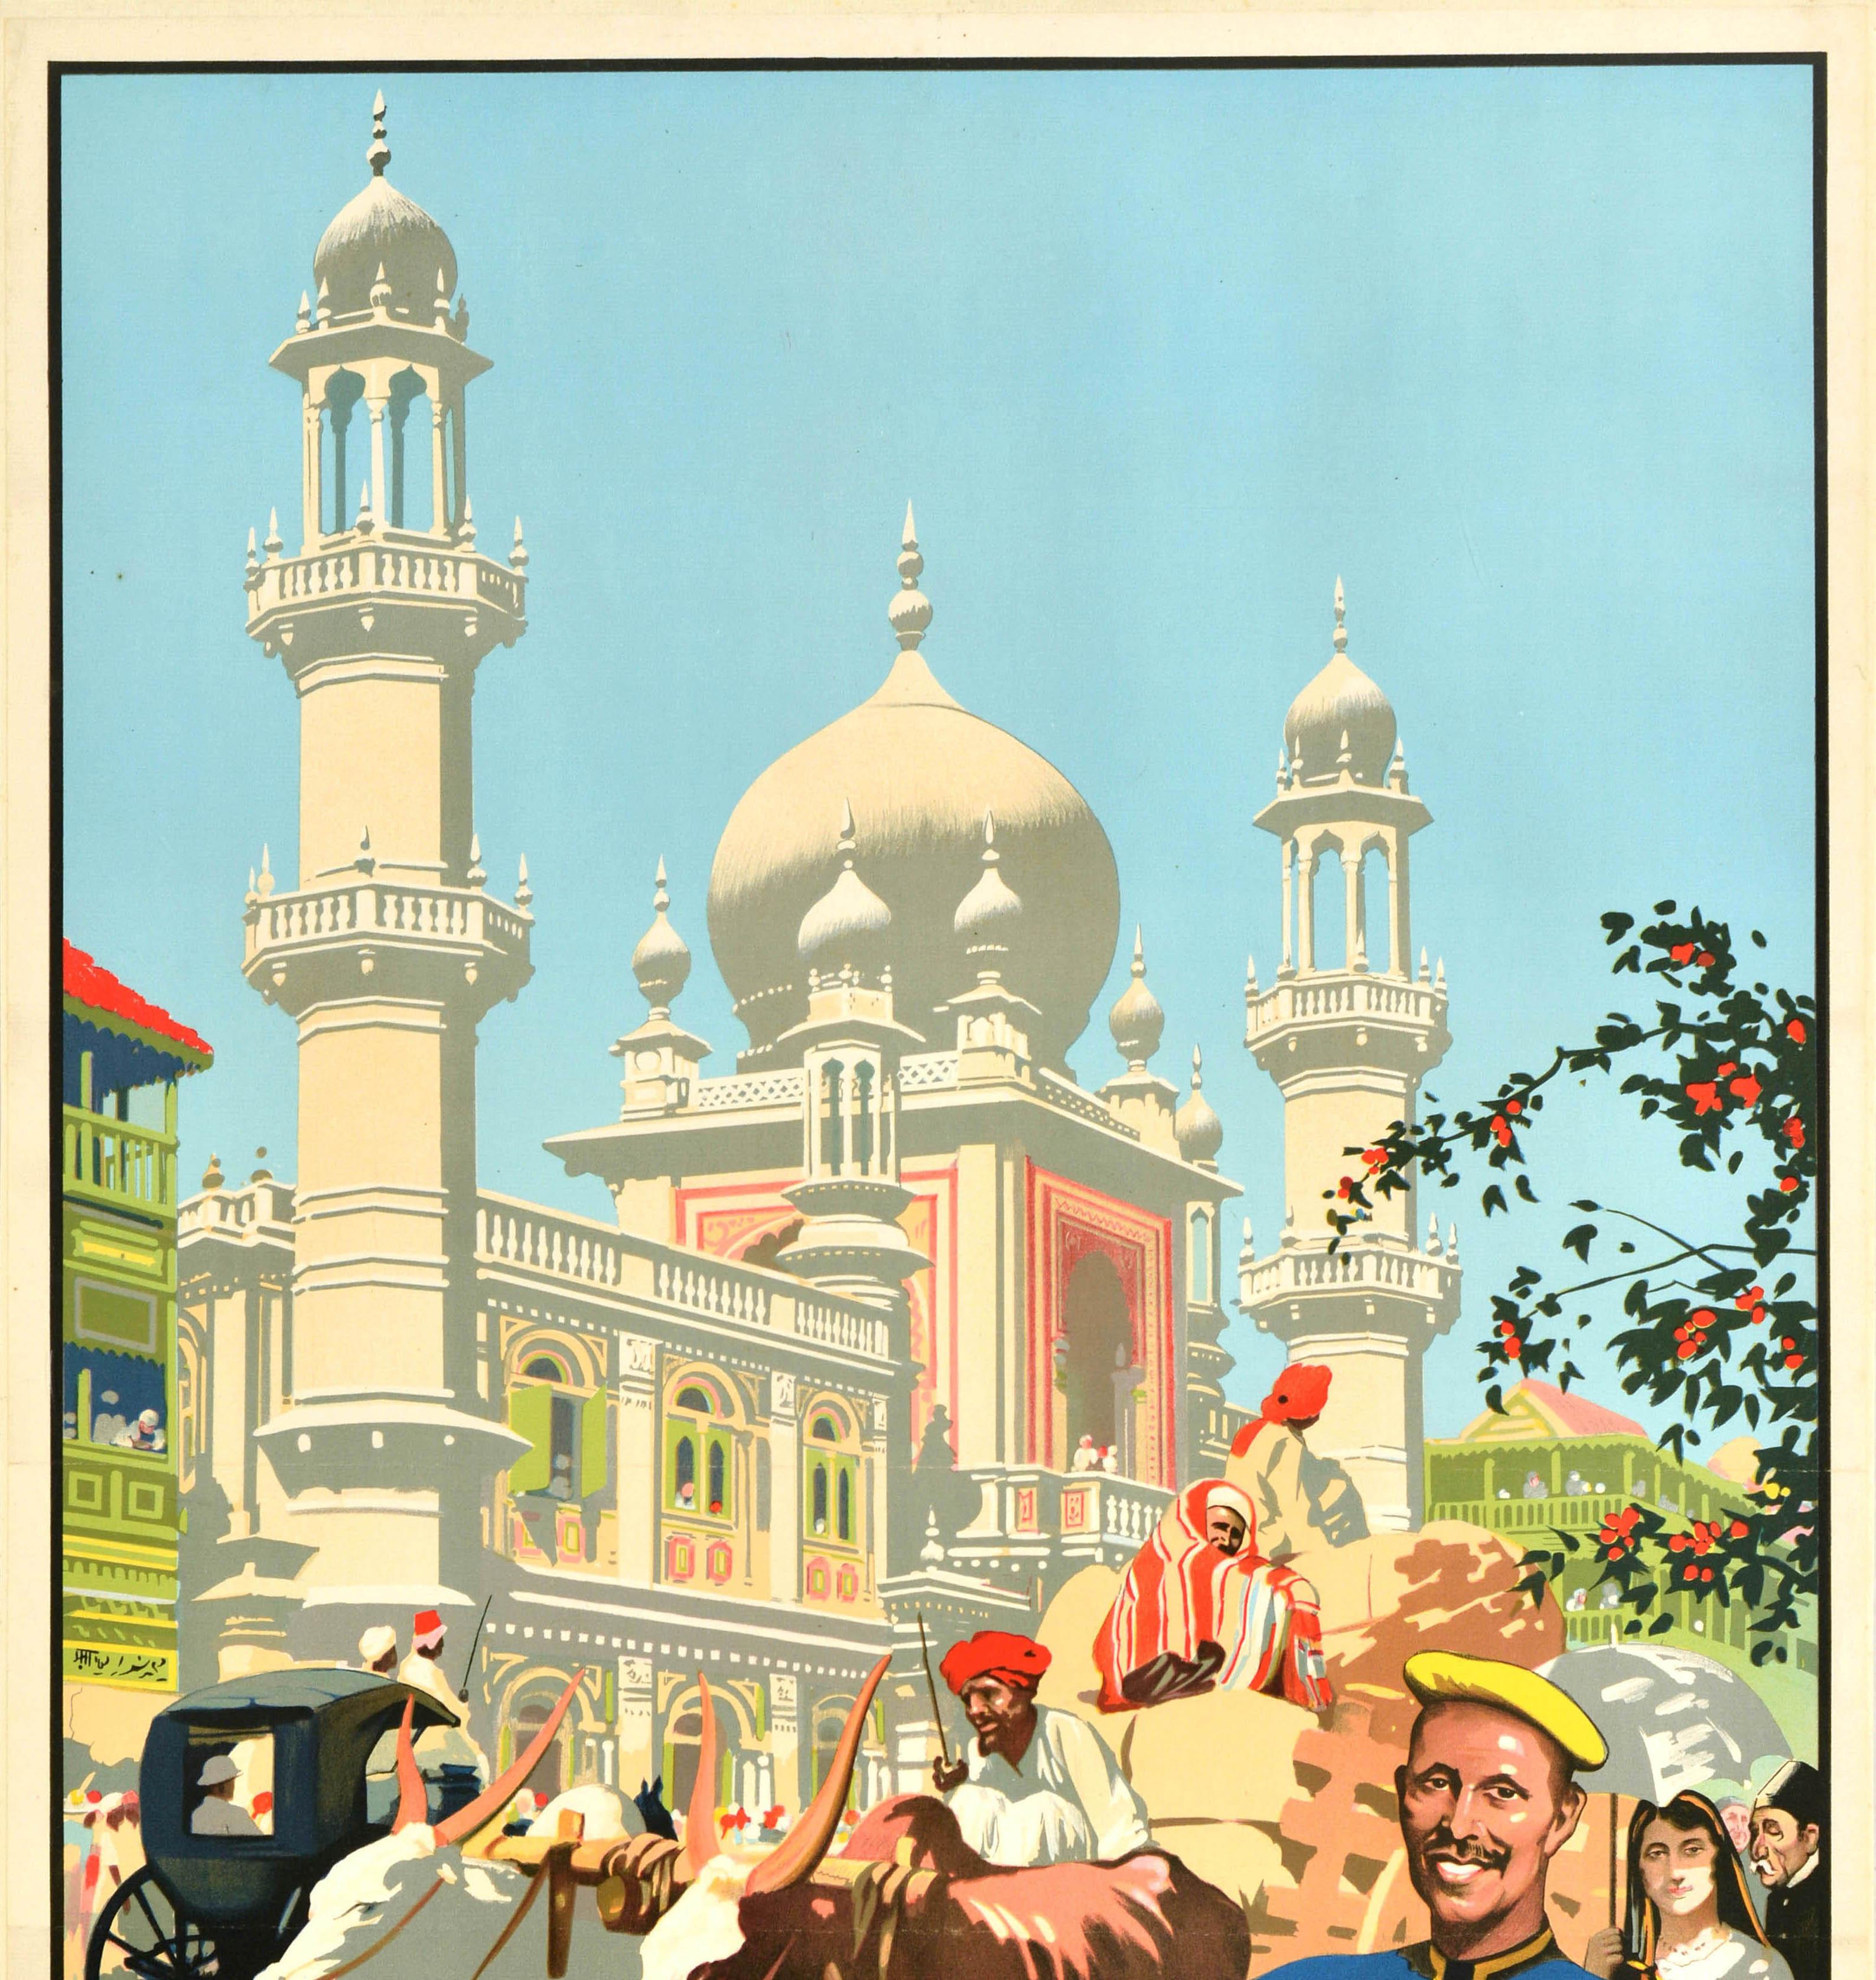 Indian Original Vintage Travel Poster Bombay See India Mumbai Old Temple Street Design For Sale